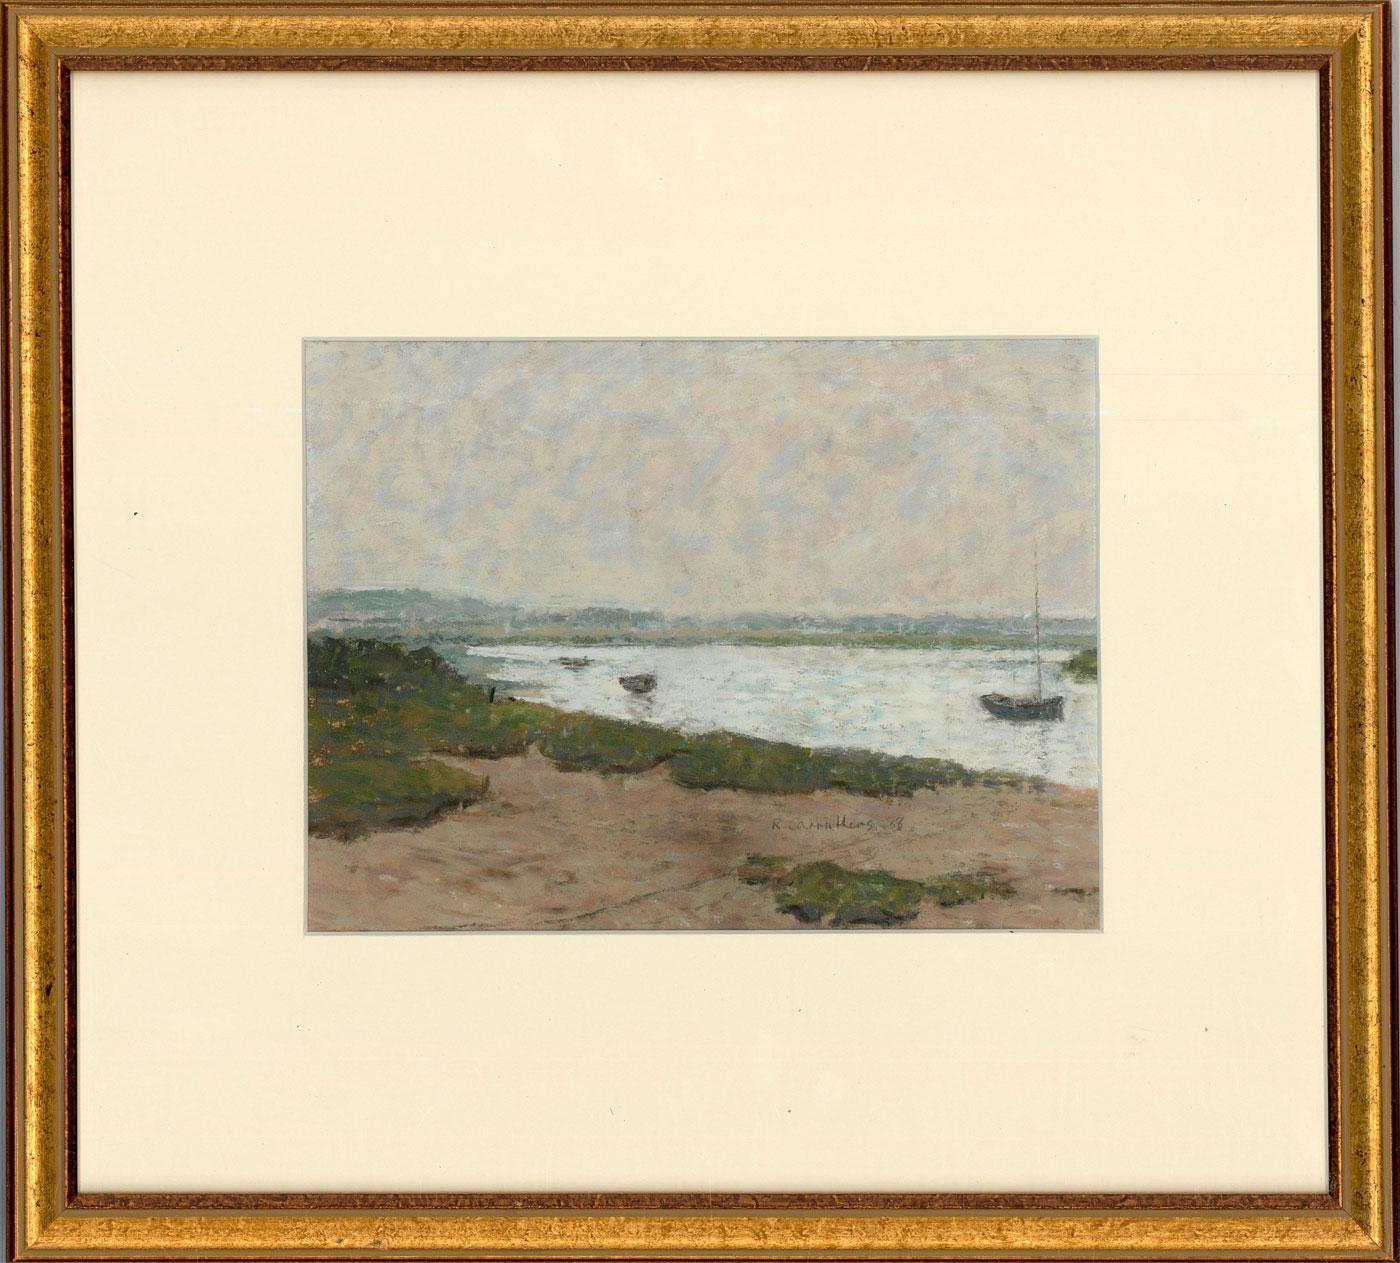 An original gouache landscape, painted by British artist Rosemary Carruthers. The scene depicts a calming estuary view, with sailing boats moored on softly rippled water. The day looks overcast, with the estuary reflecting the same clouded look as